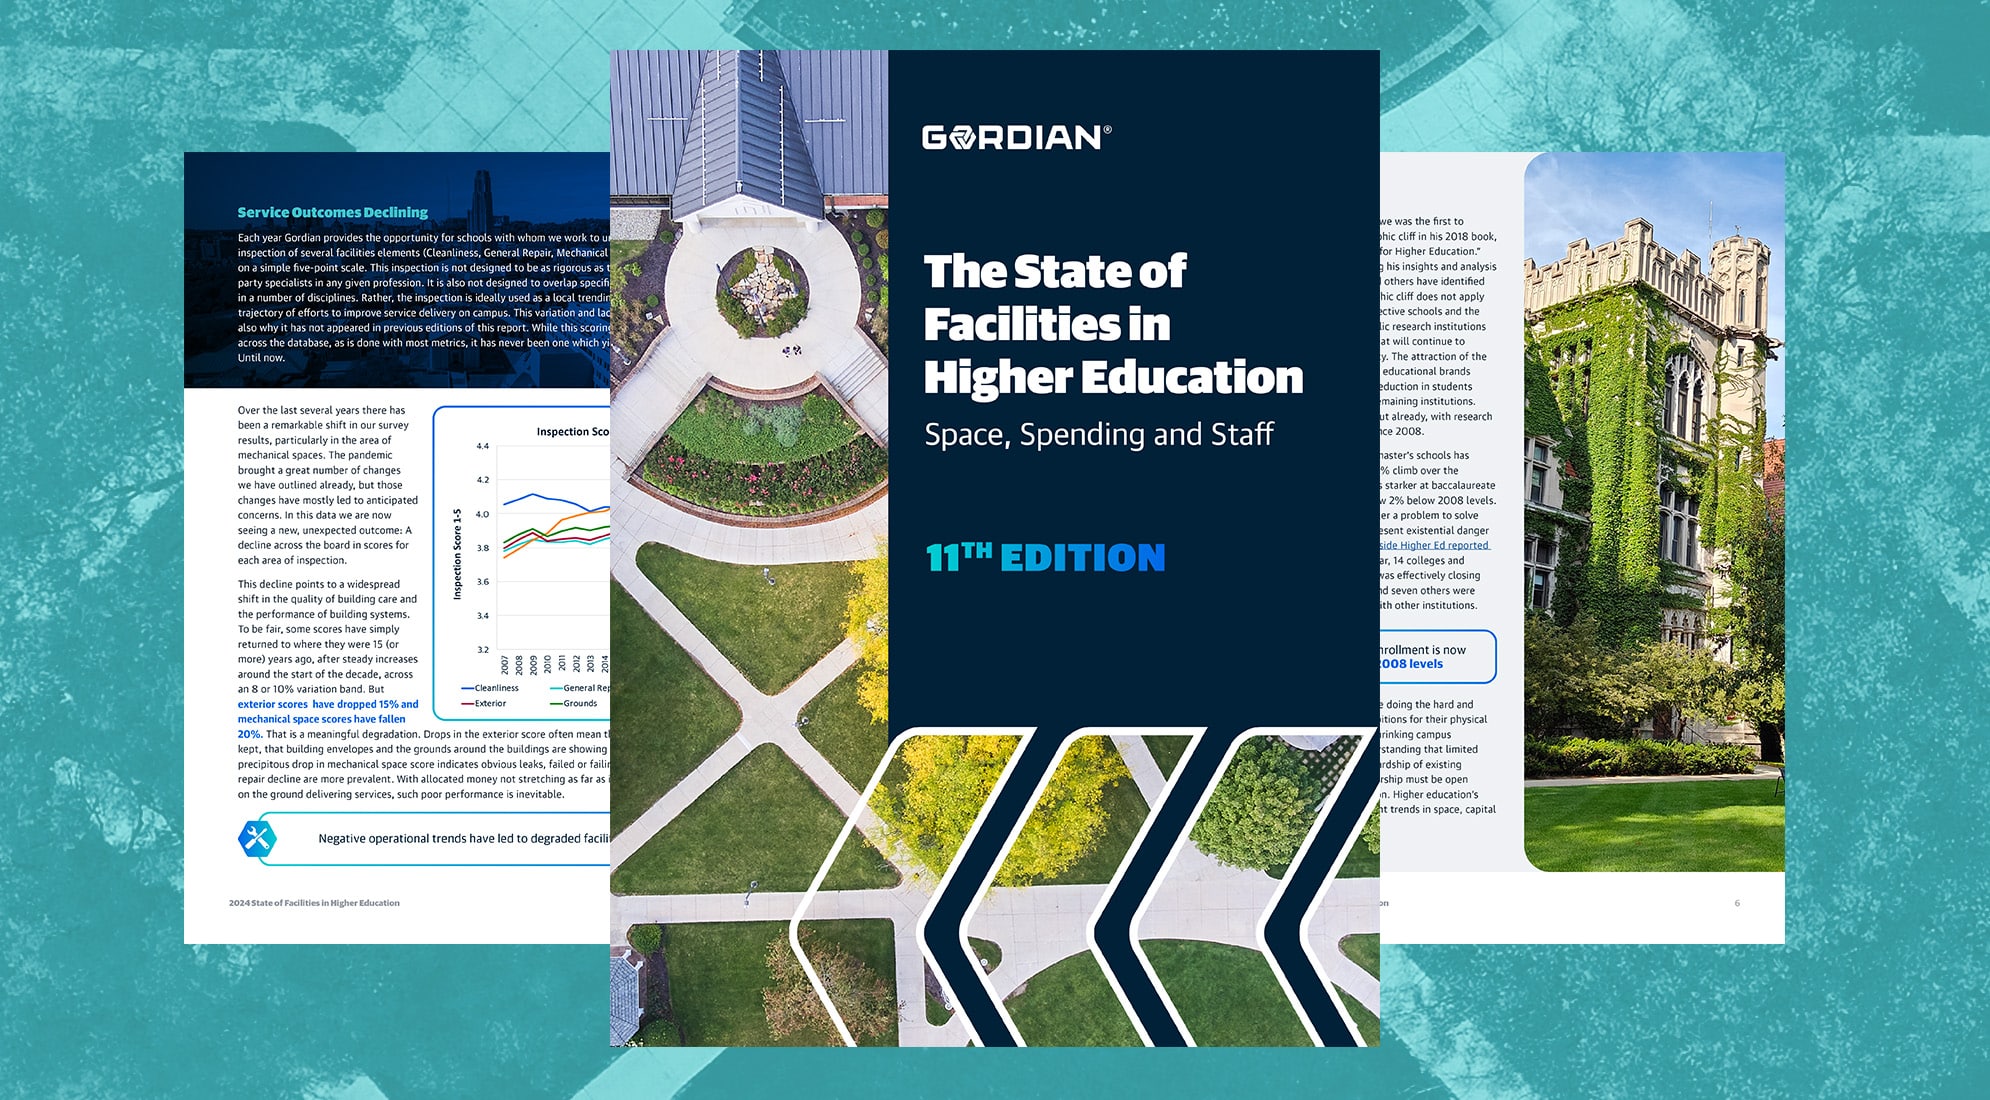 The State of Facilities in Higher Education, 11th Edition Card